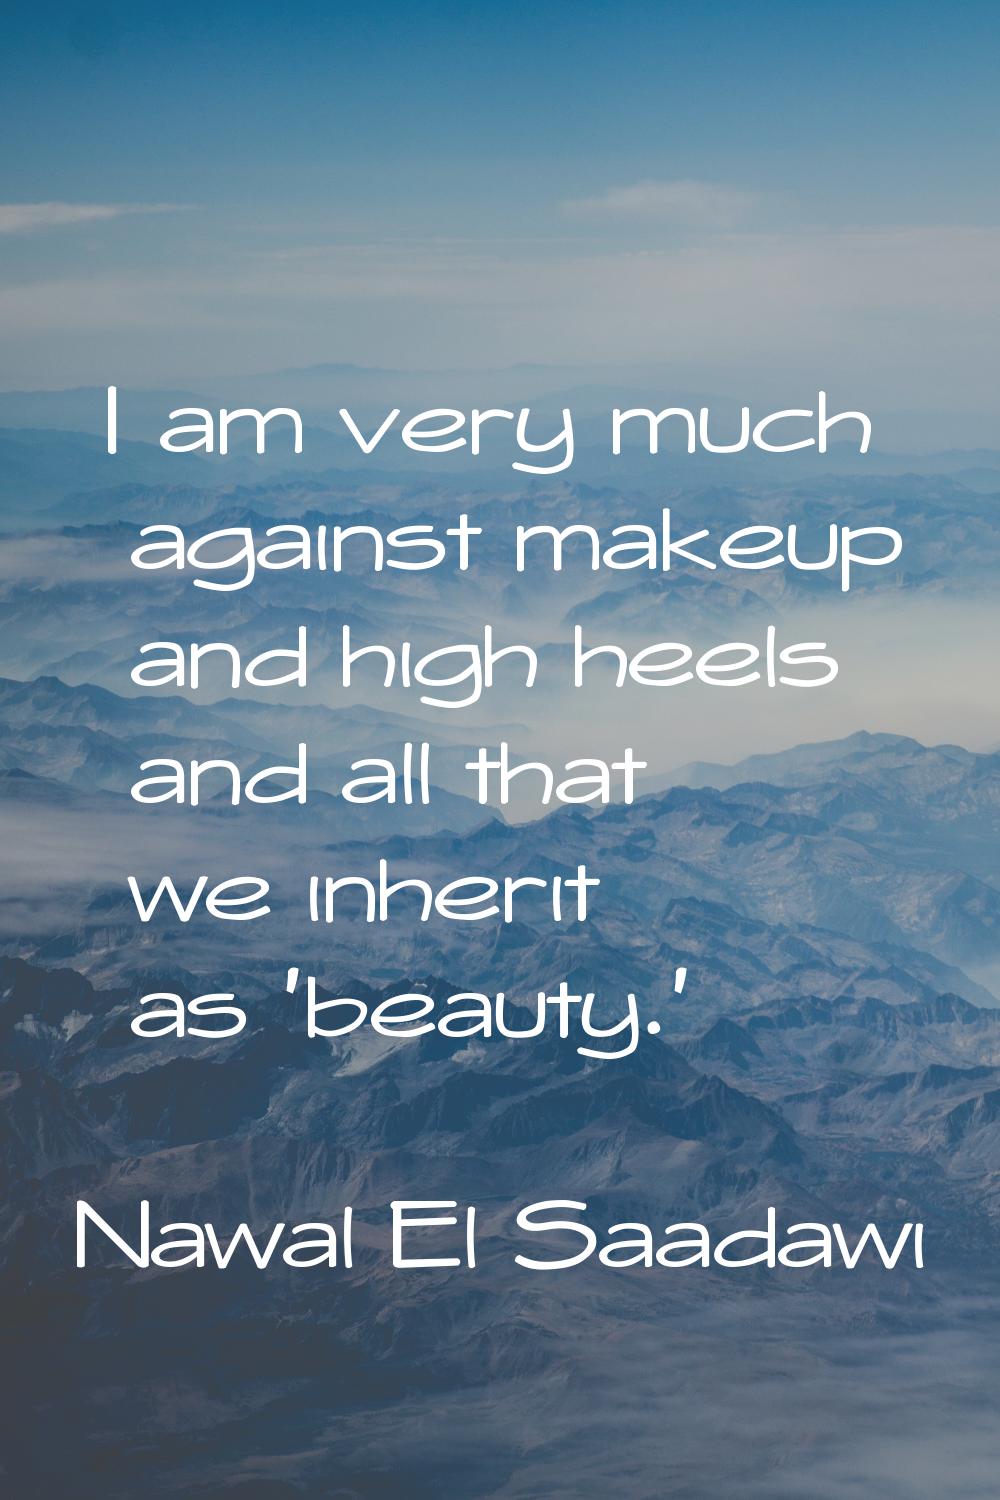 I am very much against makeup and high heels and all that we inherit as 'beauty.'